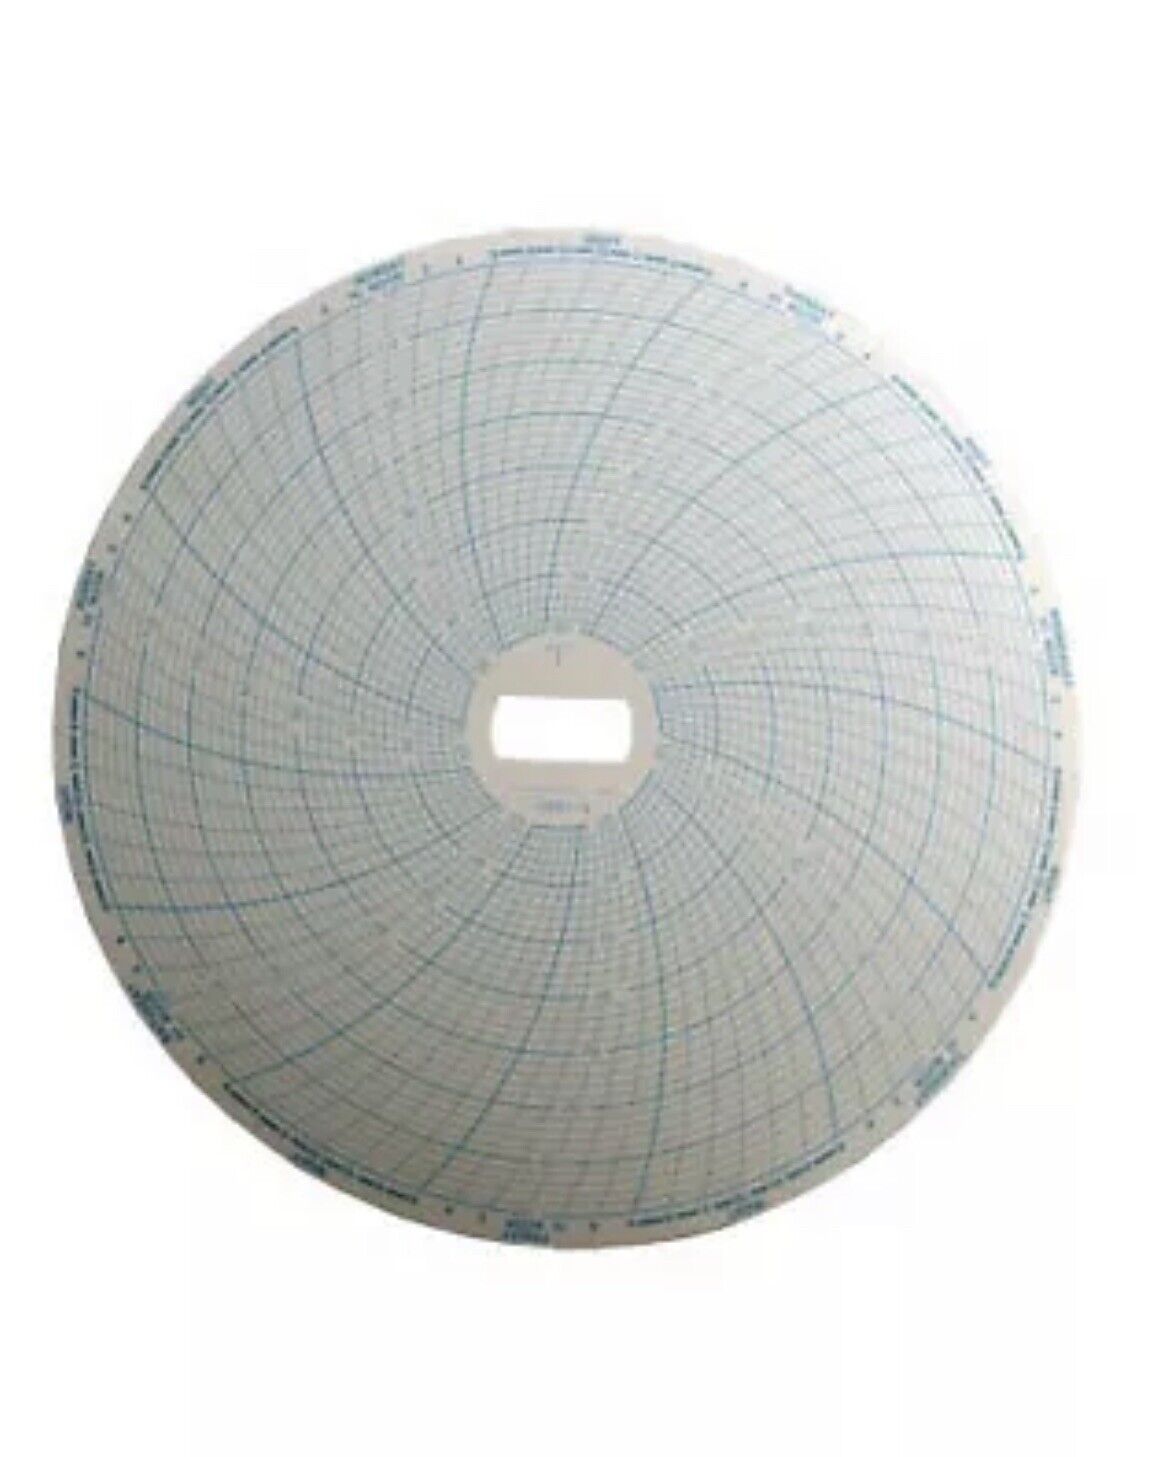 Supco CR87-9 Recording Chart Paper, 7 Day, -50° F to 120° F